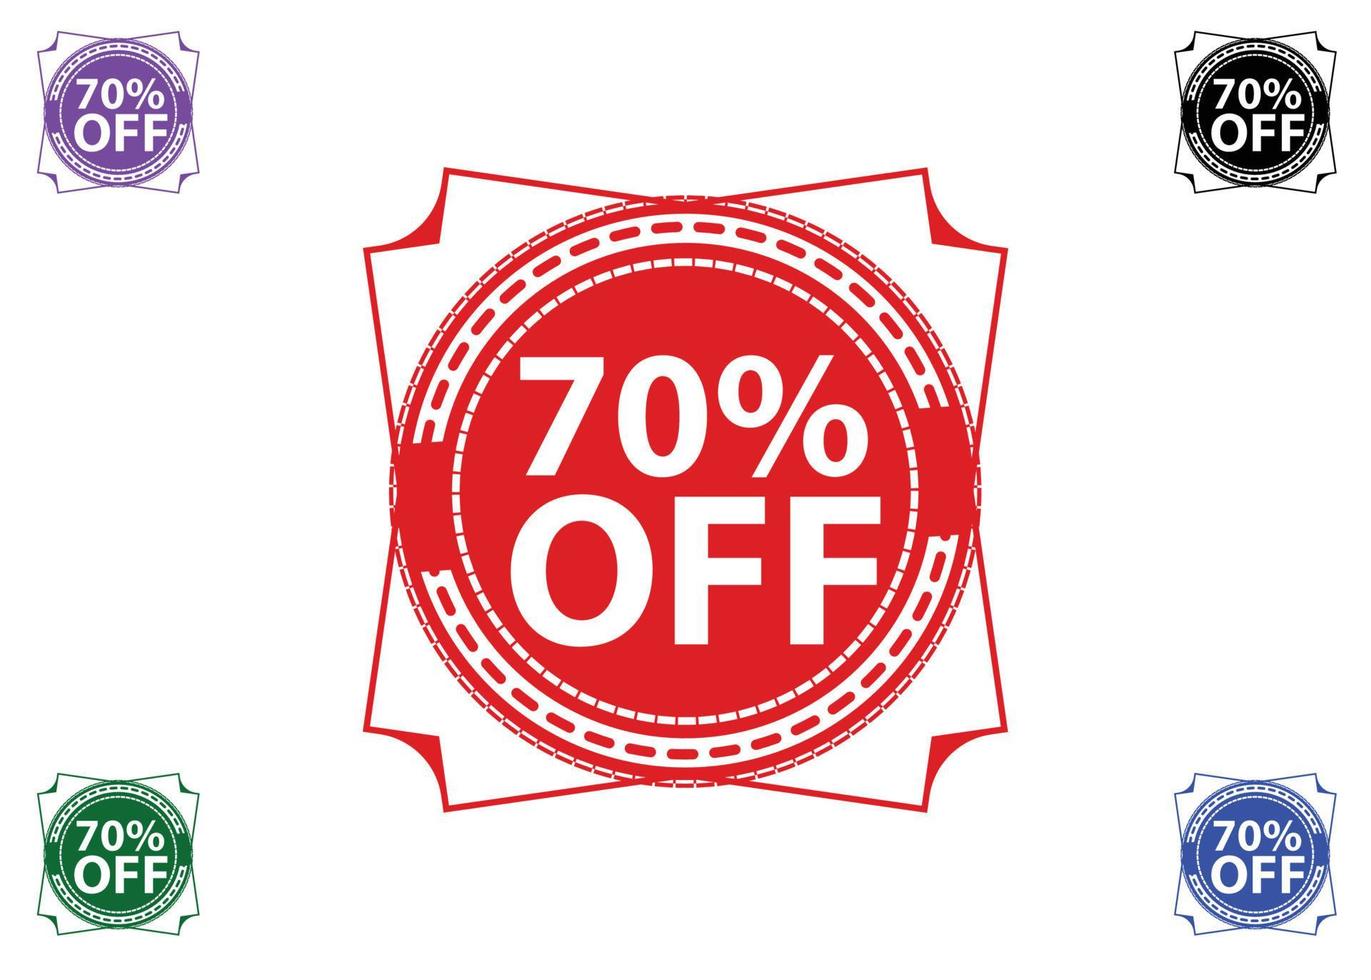 70 percent off new offer logo and icon design vector